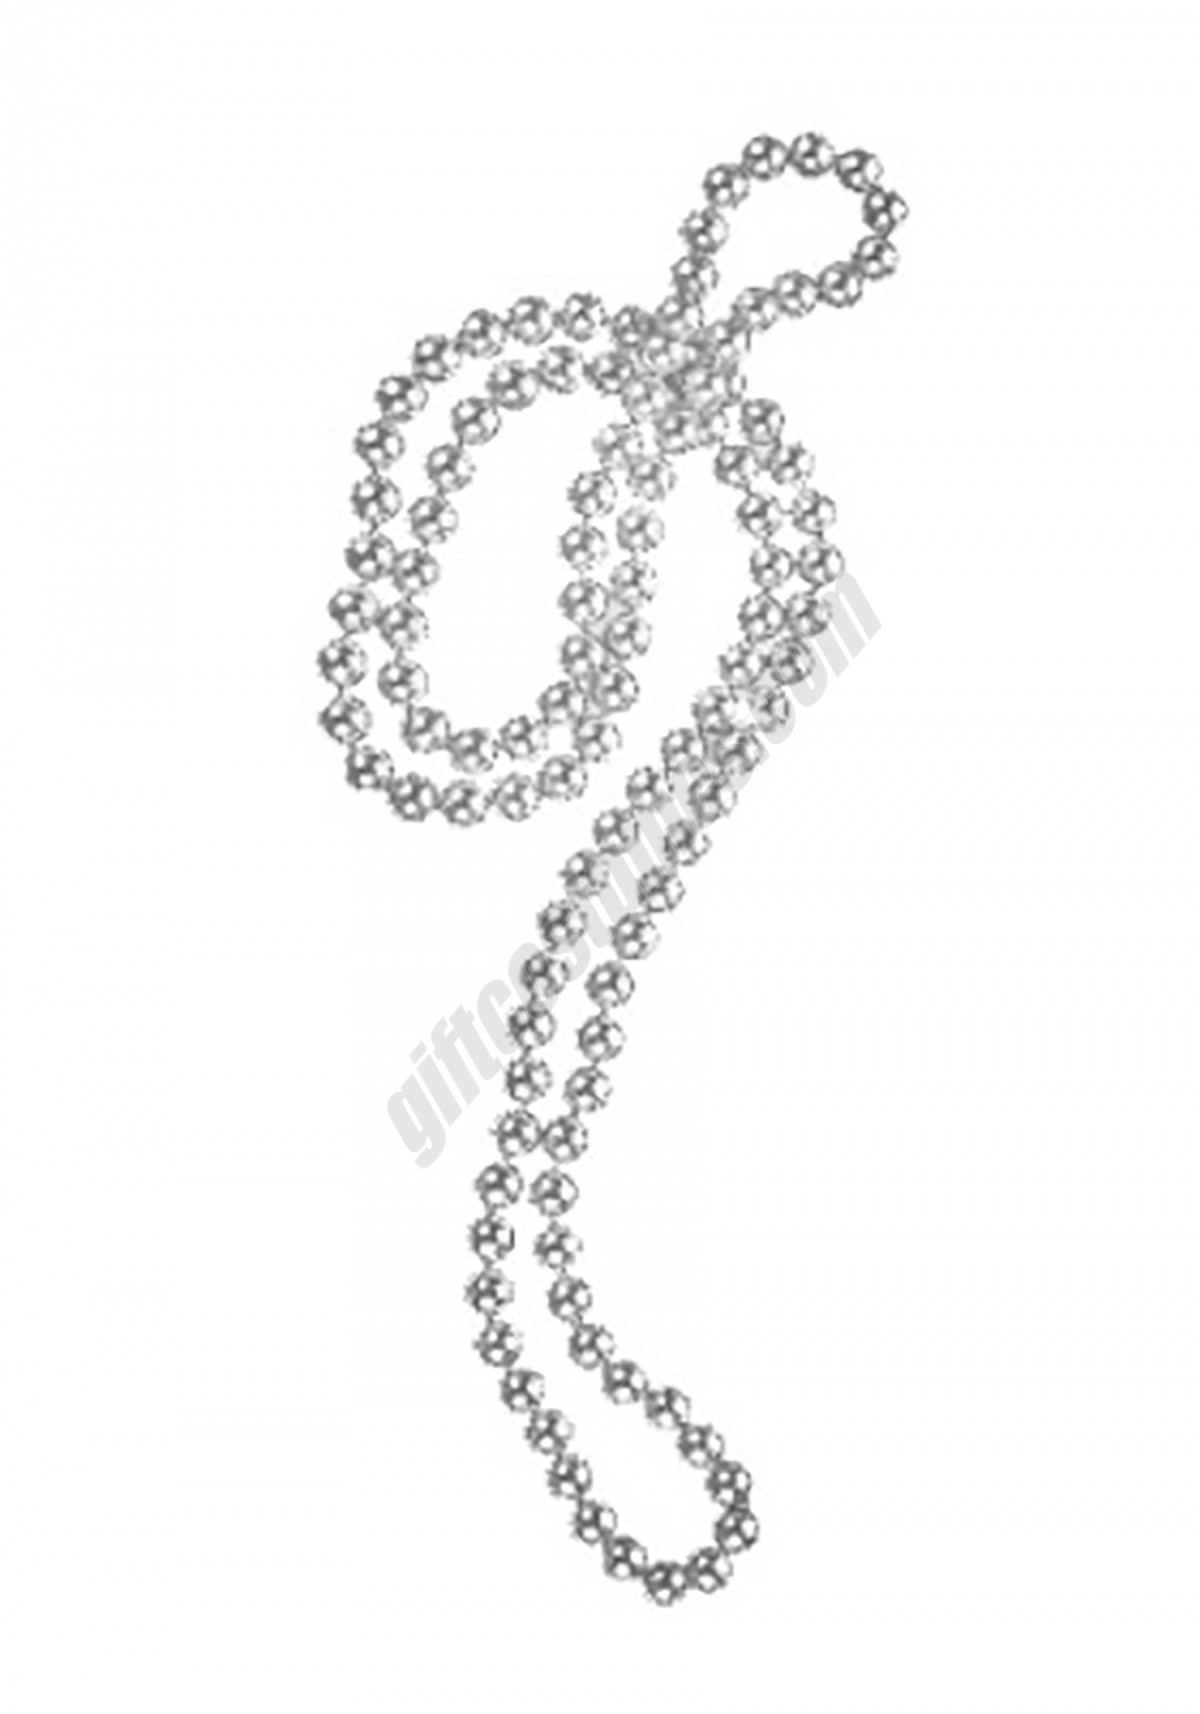 Beaded Silver Necklace Promotions - -0